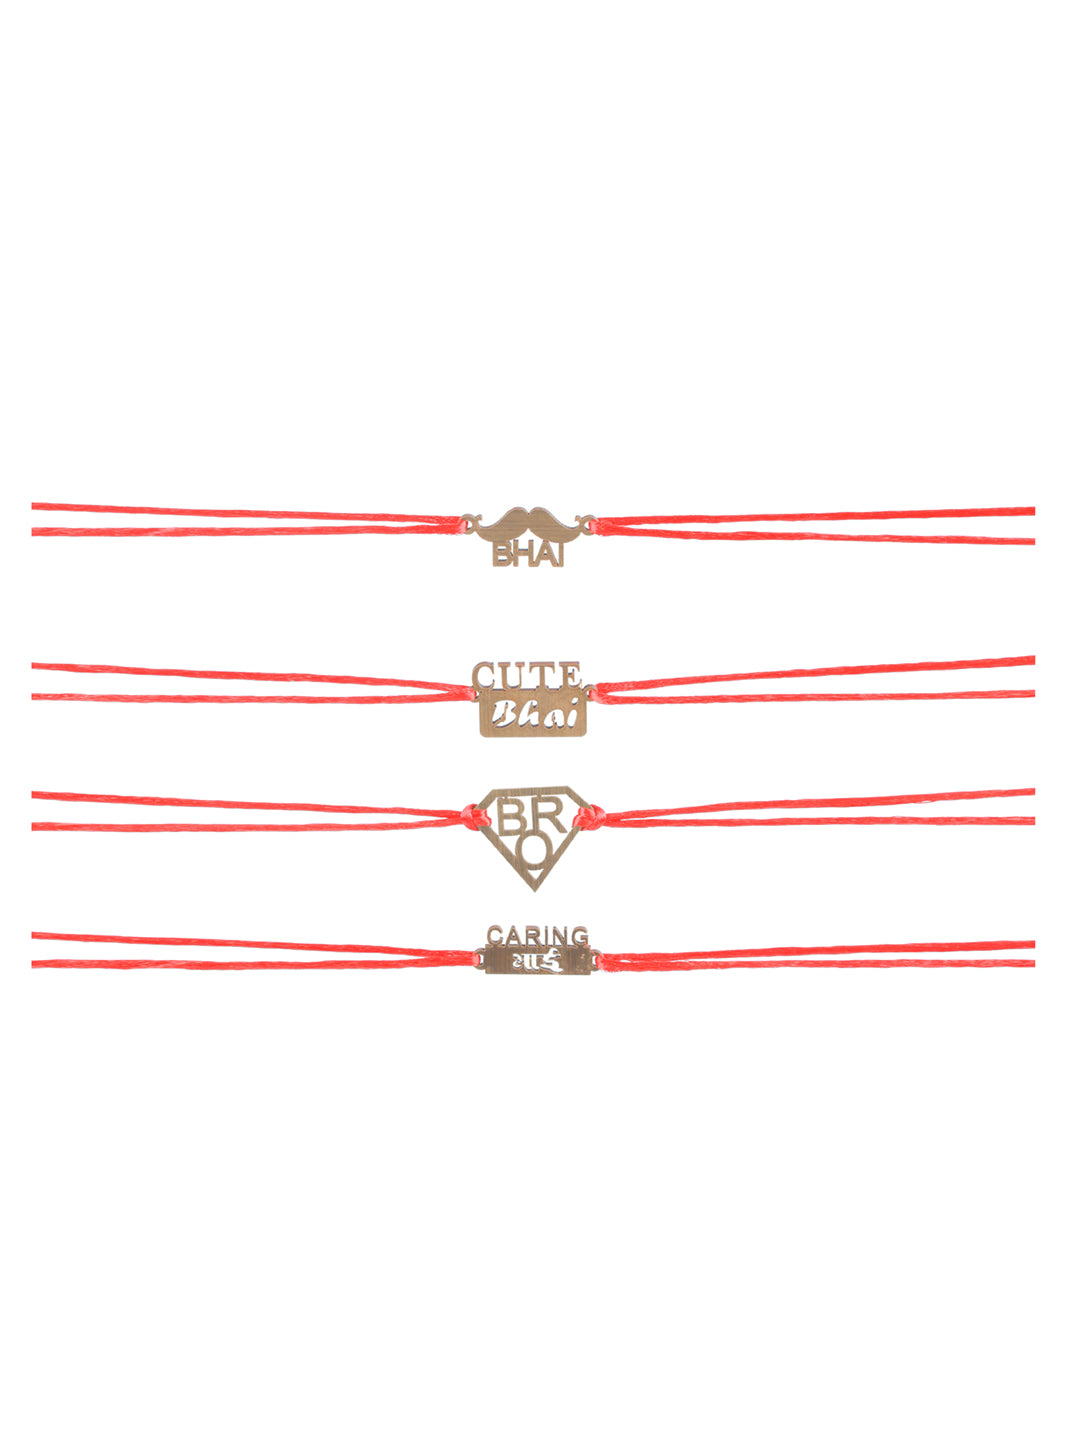 Priyaasi Wooden Red Thread Rakhi for Brother (Set of 4)